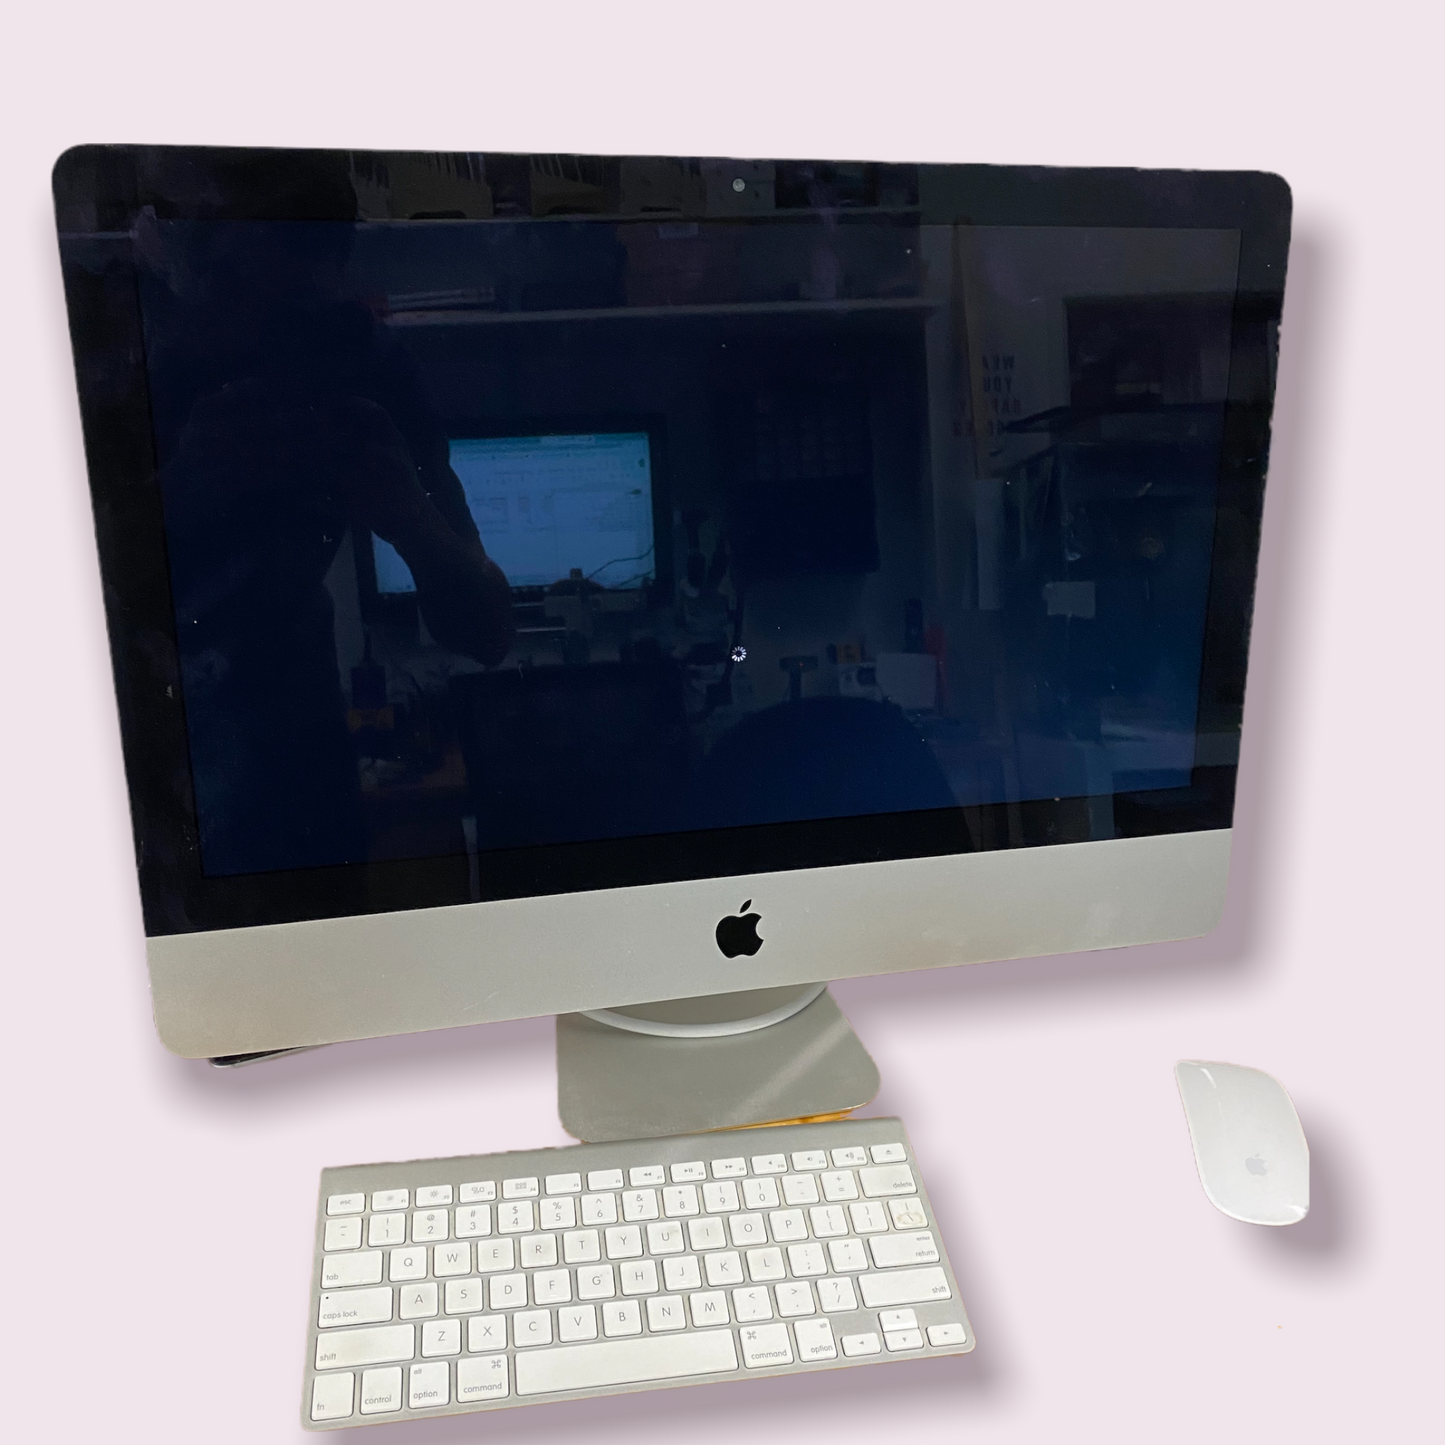 Apple iMac 21.5 2013 i5 @ 2.7GHz 1TB HDD 8GB RAM Intel Iris 1636MB Mojave With Keyboard and Mouse